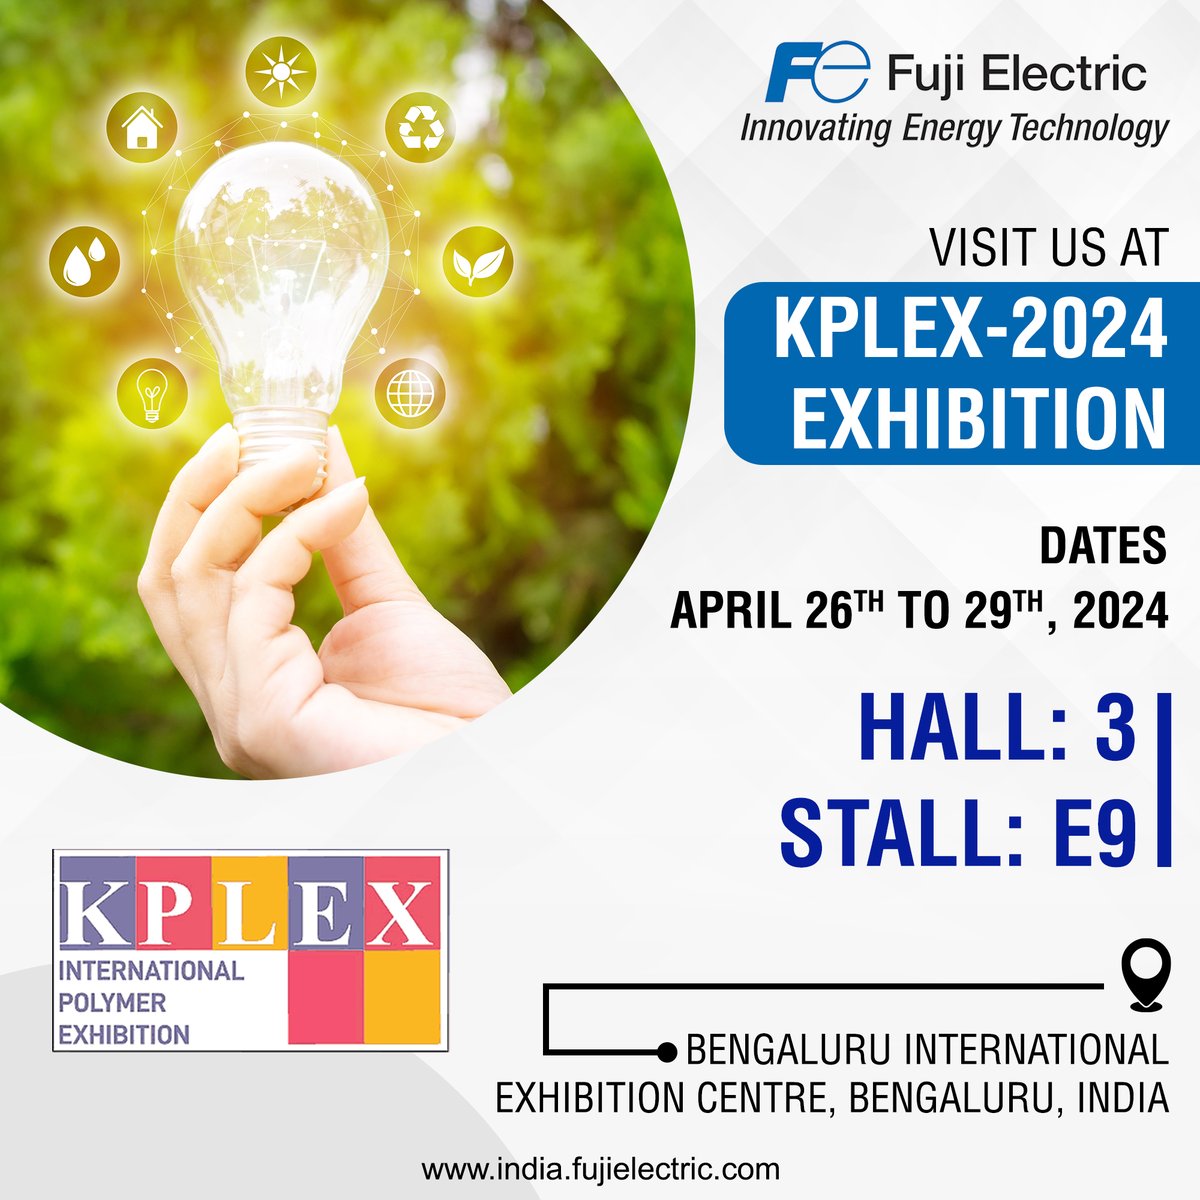 Explore energy-efficient solutions like Falcon X7, IORA X3, SCVS, and Finch Online UPS at KPLEX-2024. Optimizing performance and reducing costs in the plastic industry. Visit us at Bengaluru International Exhibition Centre, April 26-29, 2024.
#fujielectric #fujielectricindia